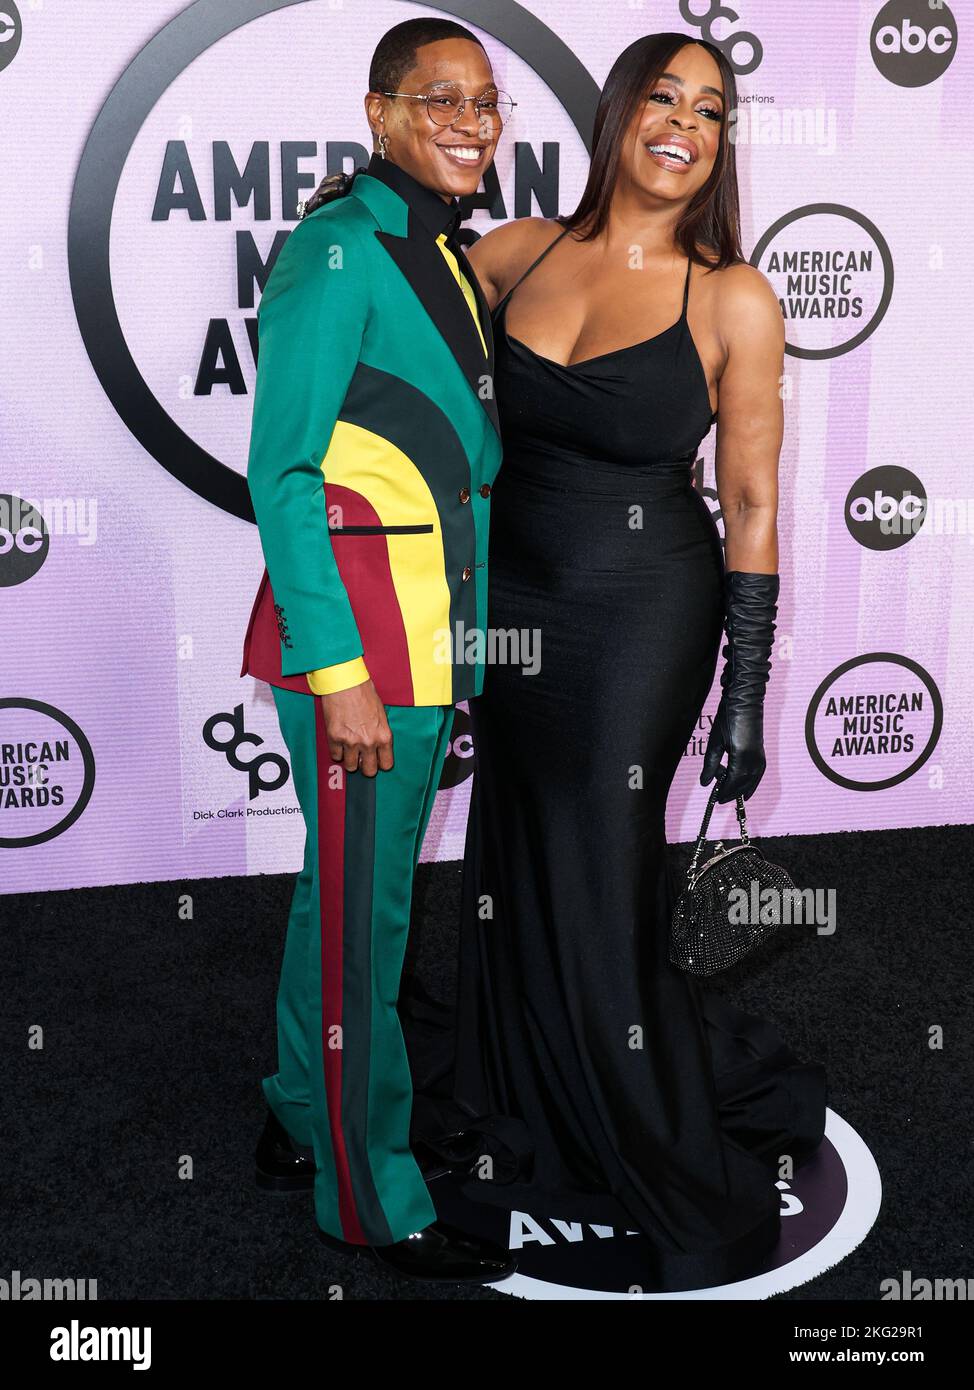 Los Angeles, United States. 20th Nov, 2022. LOS ANGELES, CALIFORNIA, USA - NOVEMBER 20: Jessica Betts and wife Niecy Nash Betts arrive at the 2022 American Music Awards (50th Annual American Music Awards) held at Microsoft Theater at L.A. Live on November 20, 2022 in Los Angeles, California, United States. (Photo by Xavier Collin/Image Press Agency) Credit: Image Press Agency/Alamy Live News Stock Photo